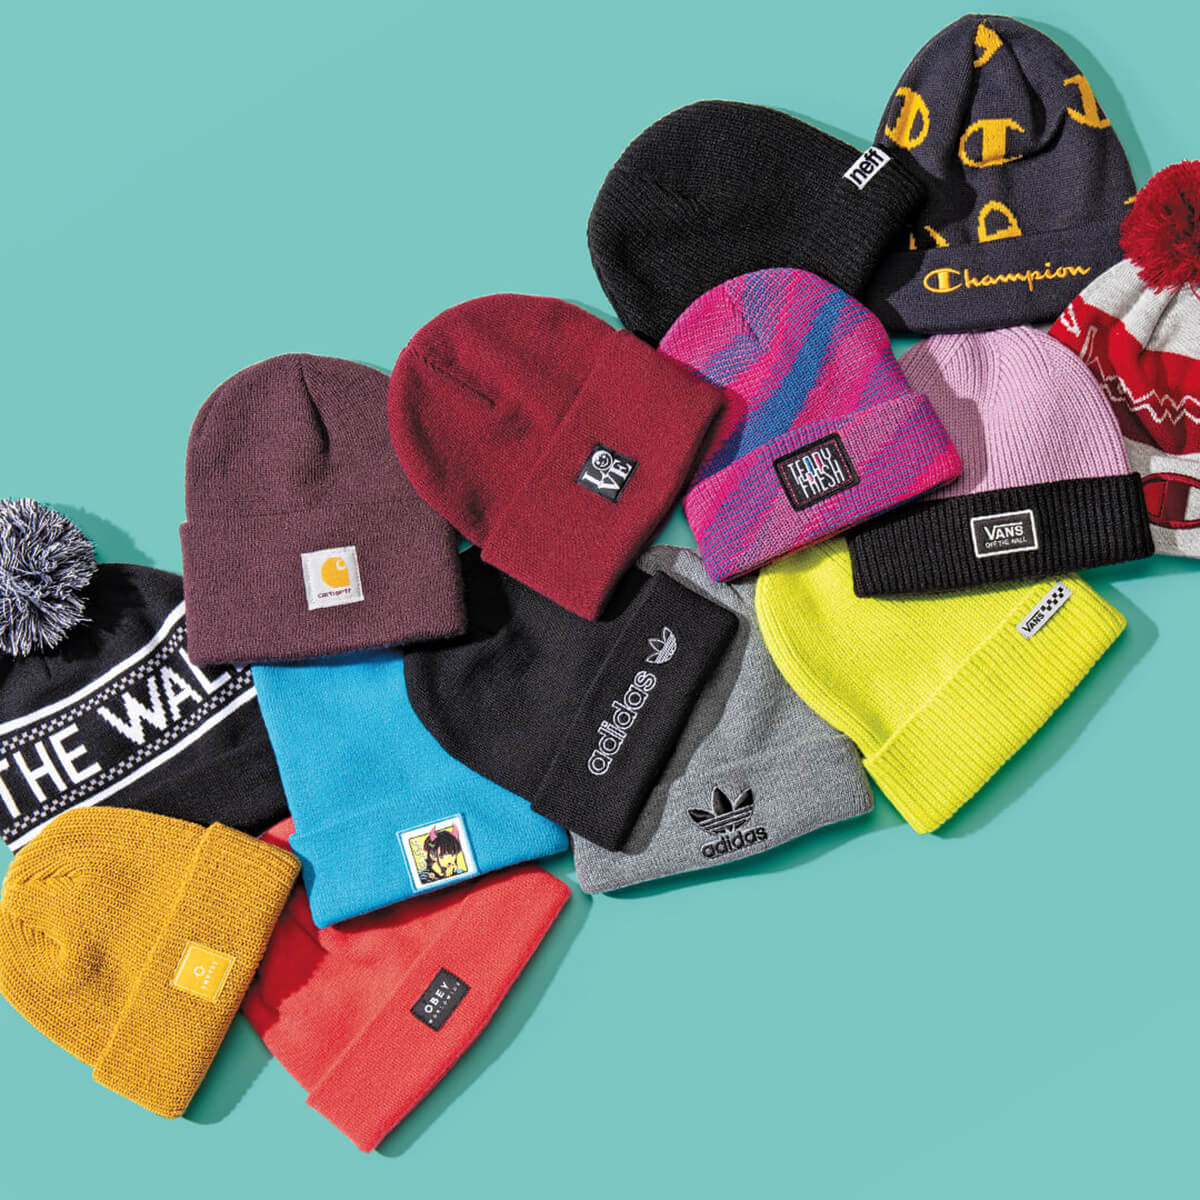 NEW ARRIVAL BEANIES FROM TOP BRANDS